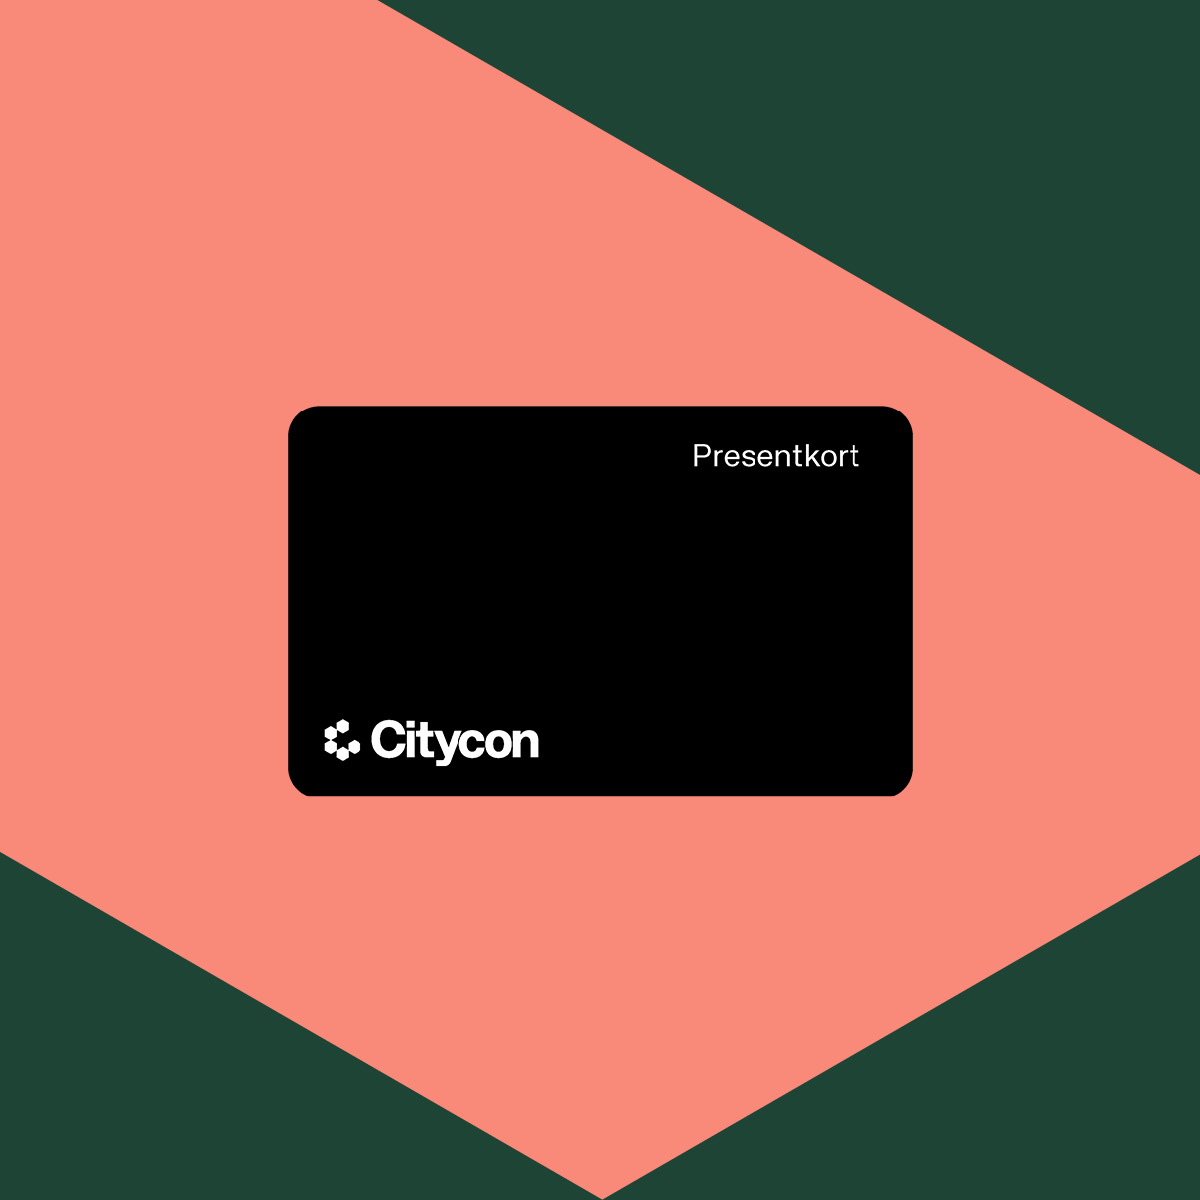 CINC_Webpage_Banners_Sub-page_giftcard_lift-section_SWE_CoralGreen.jpg